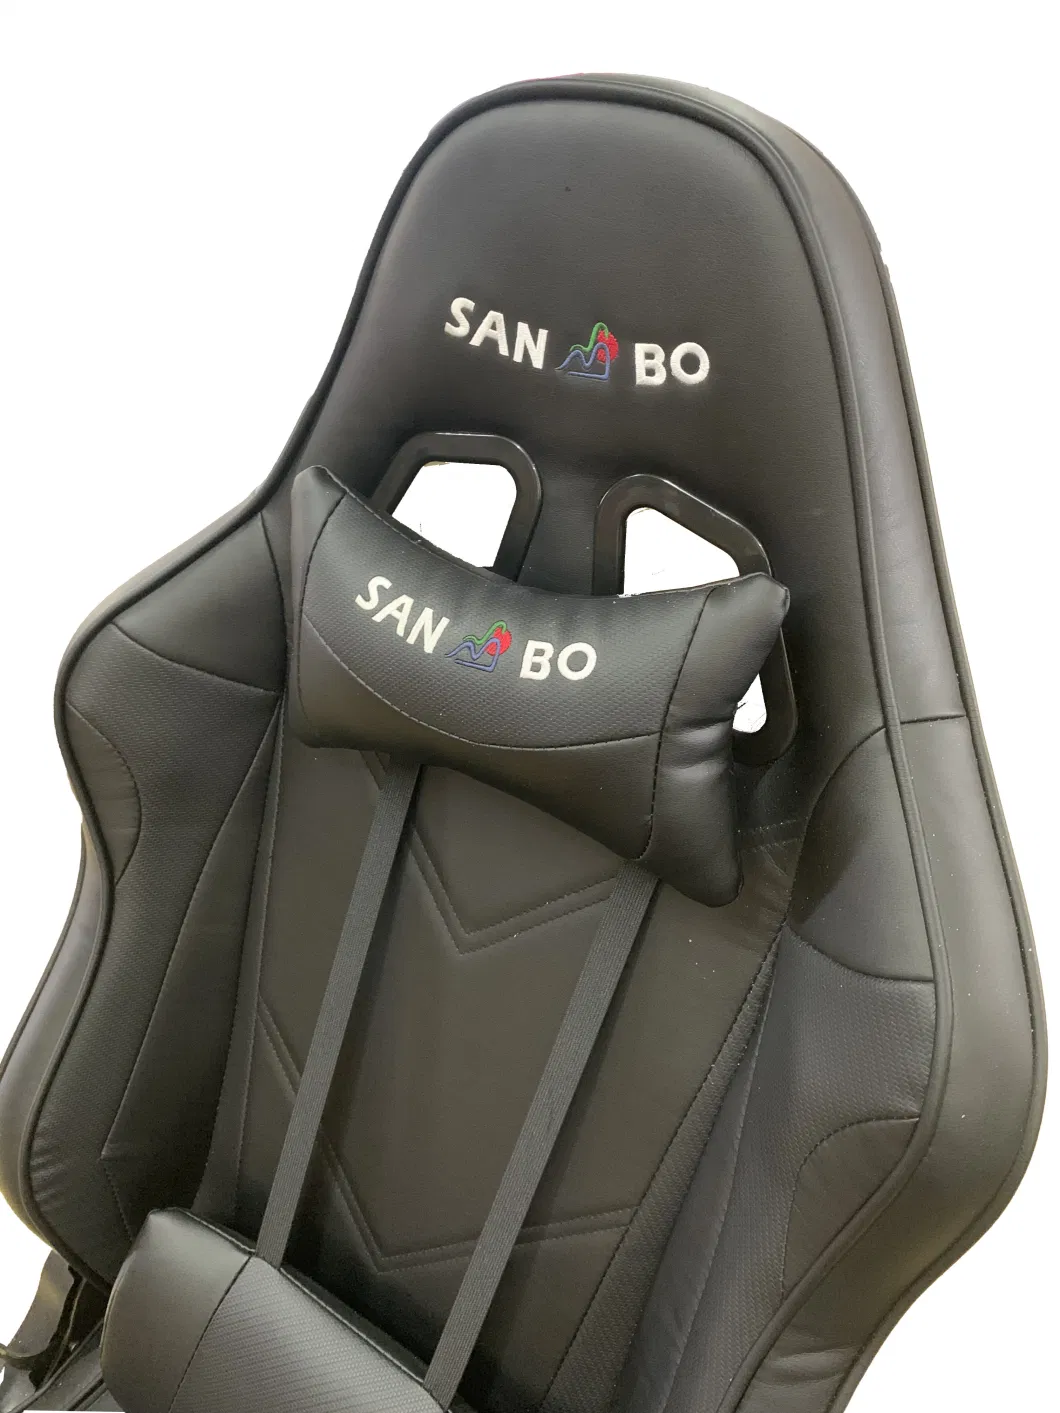 All-New 360 Degree Rotatable Racer Sport Gaming Chair with PU Leather